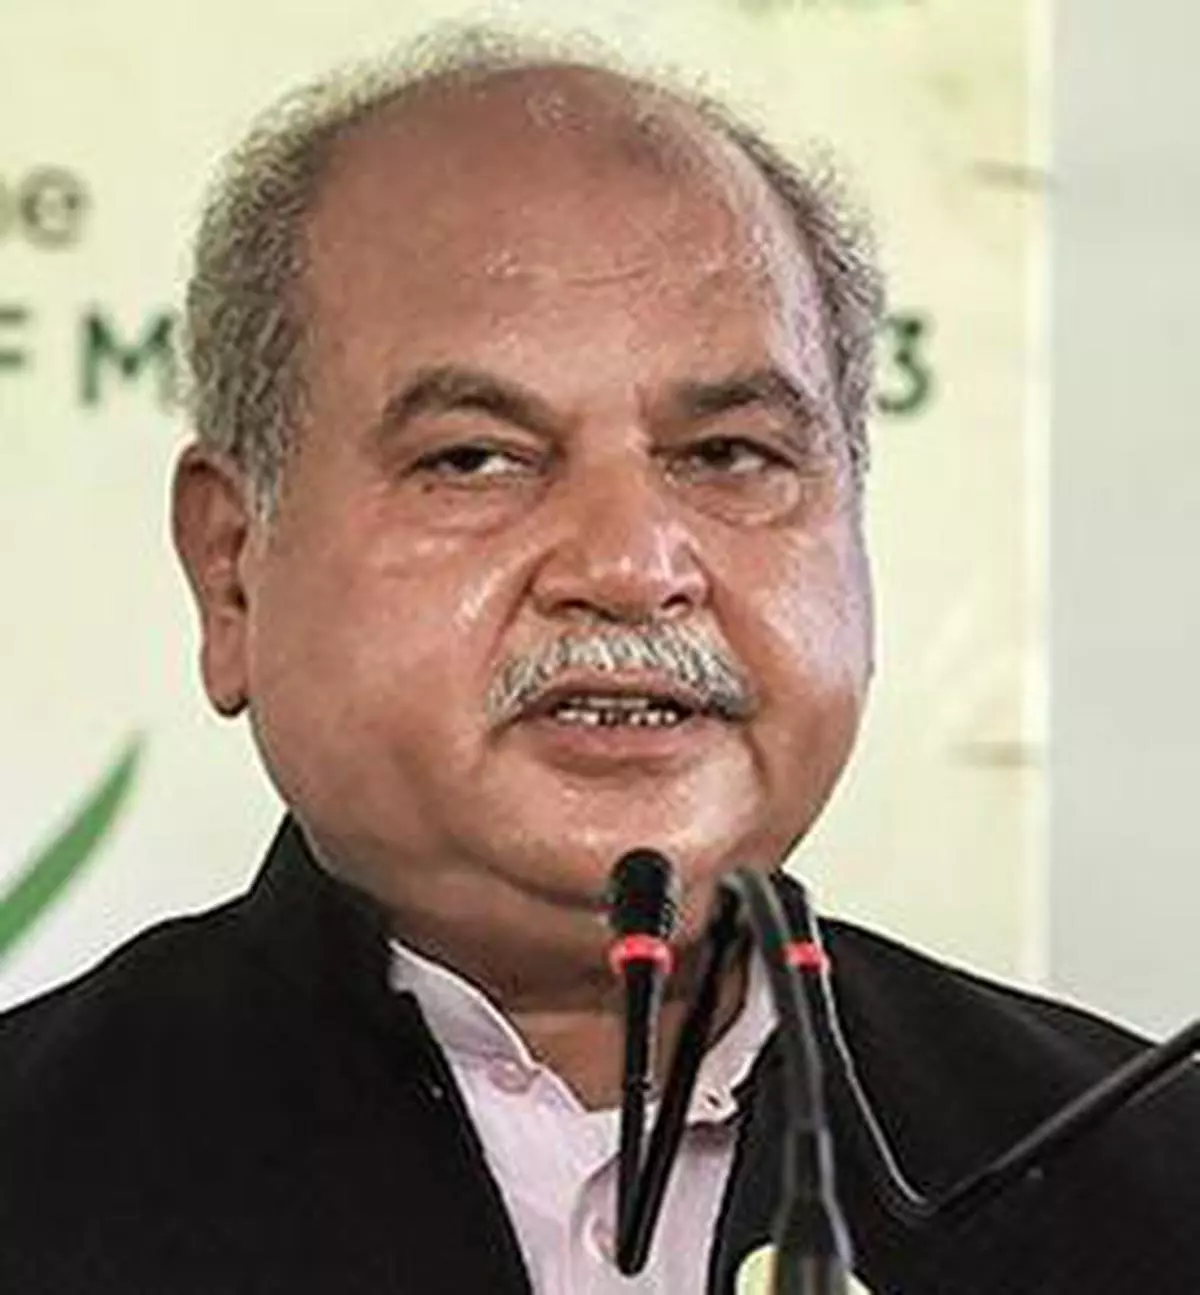 Union Minister for Agriculture and Farmers Welfare Narendra Singh Tomar 